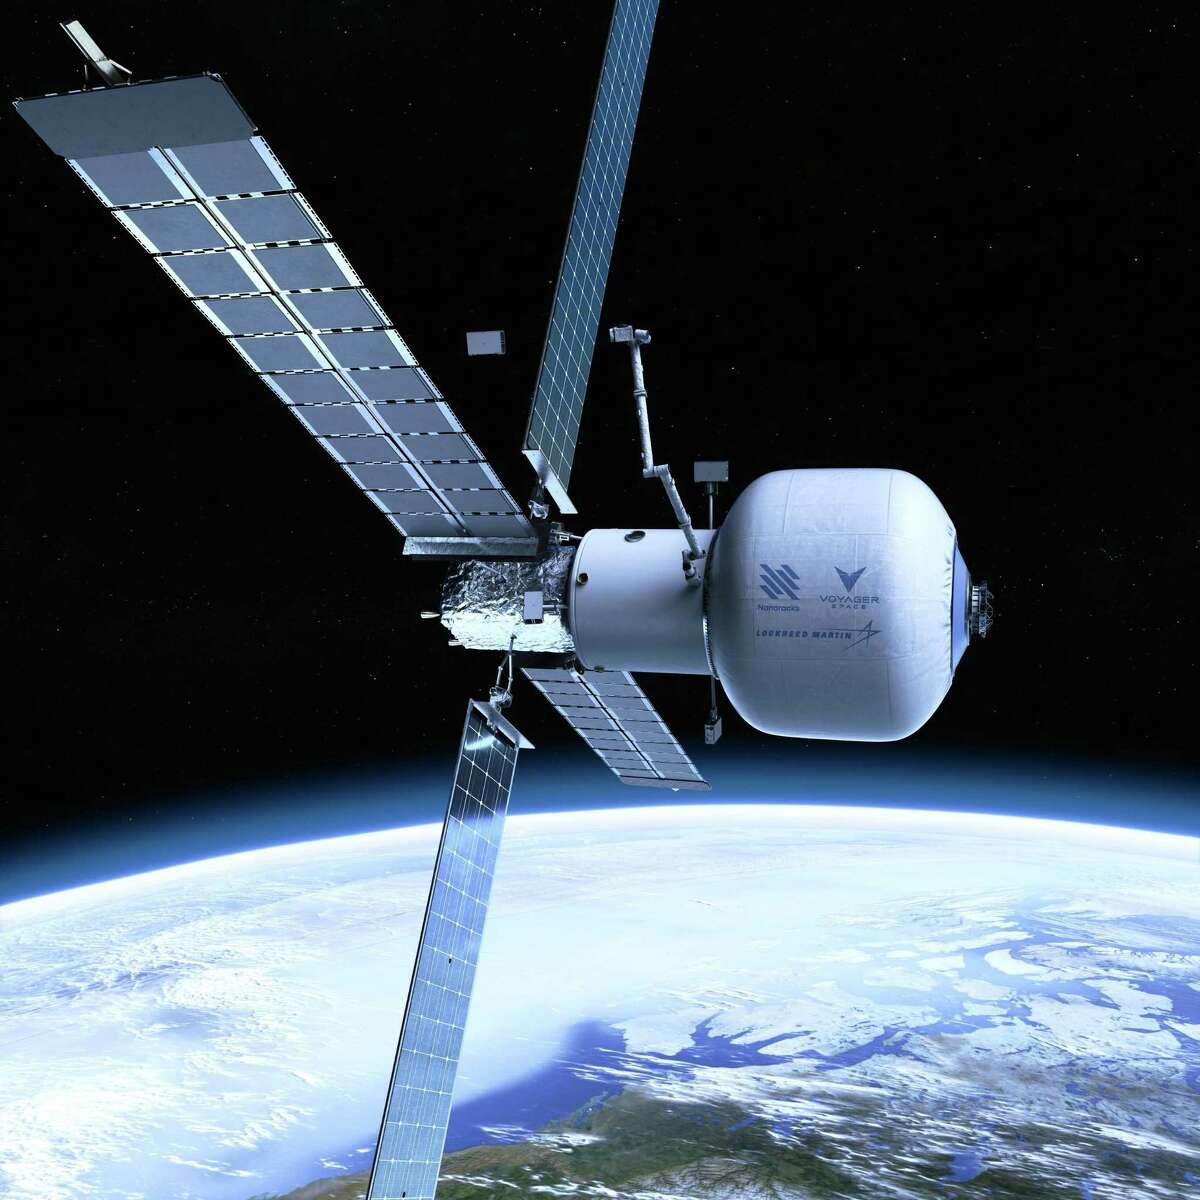 Pictured is a rendering of the Starlab space station.